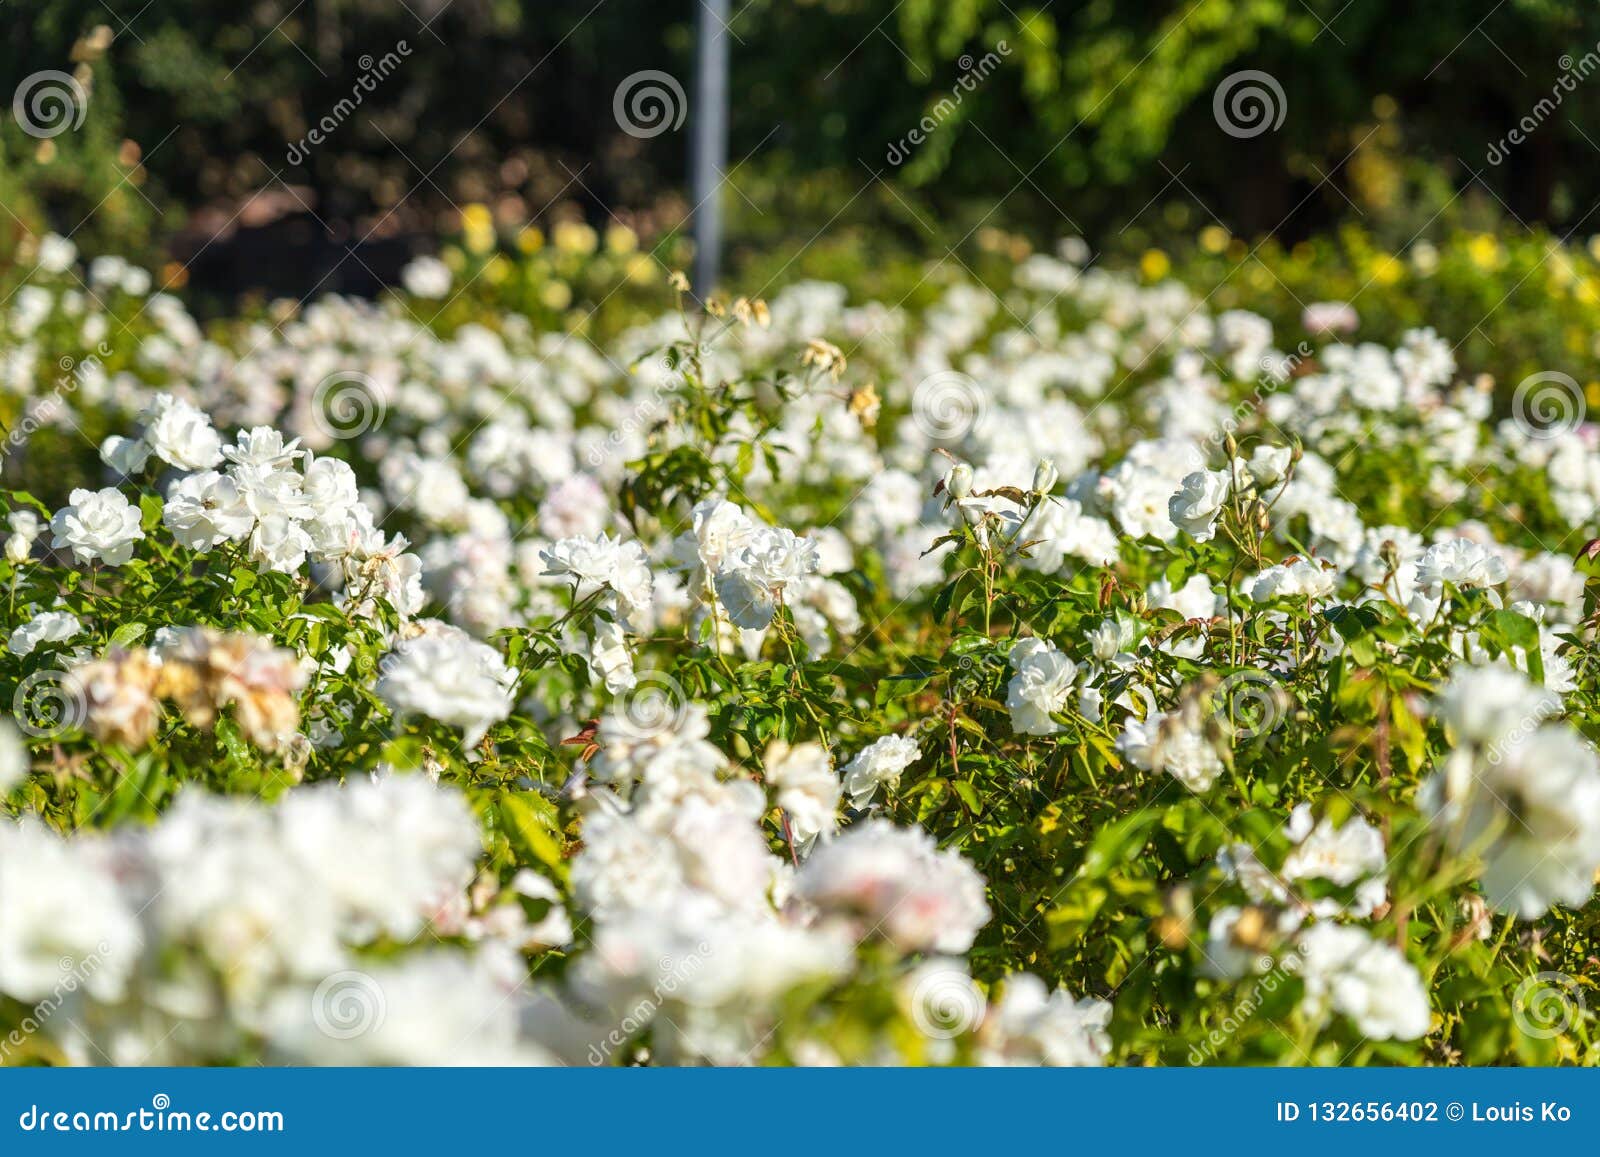 White Roses Blurry Background In Rose Gardens Stock Photo Image